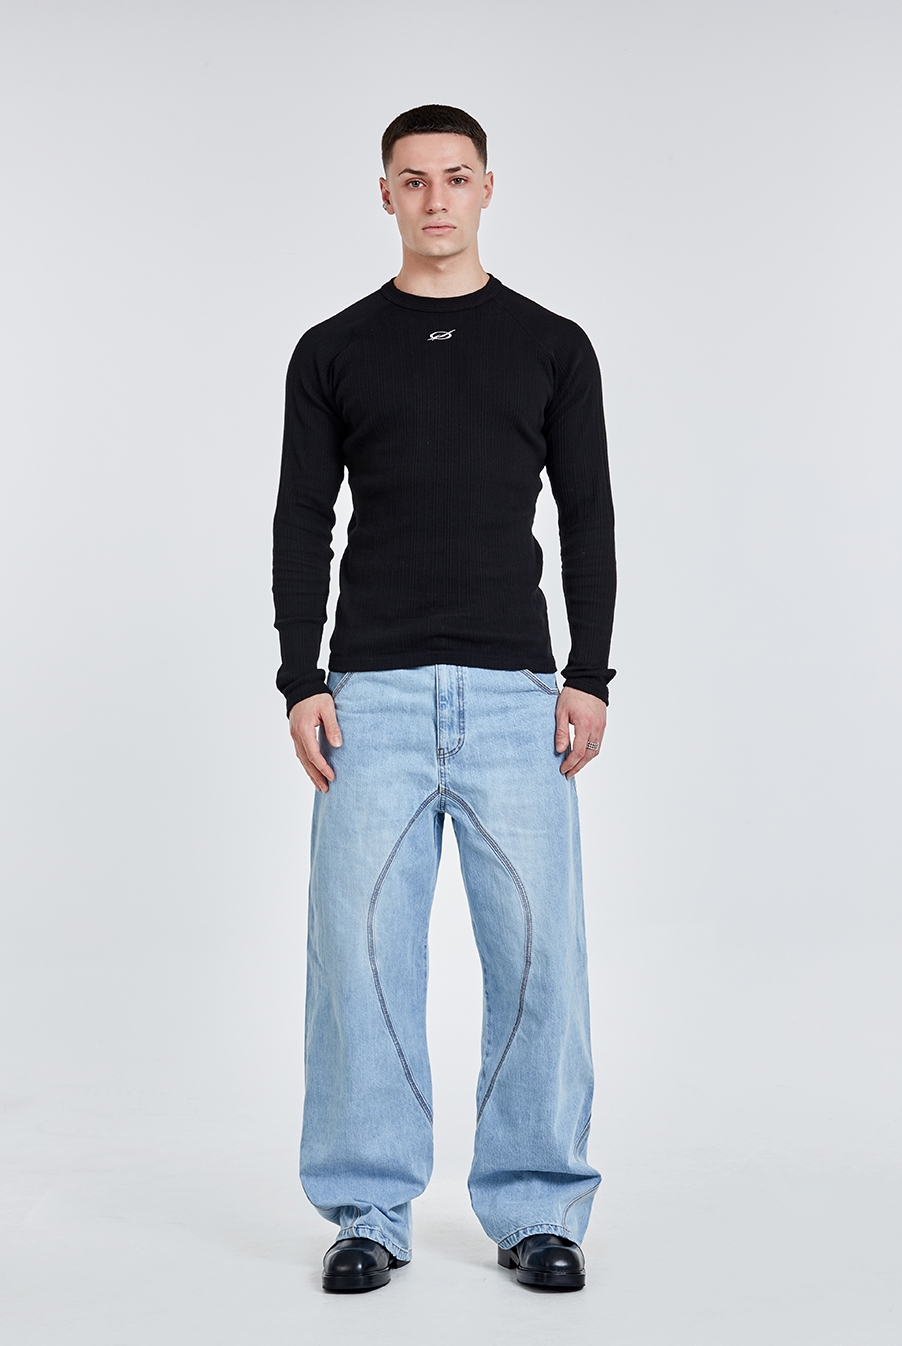 Tunnel lining wide pants - Light blue